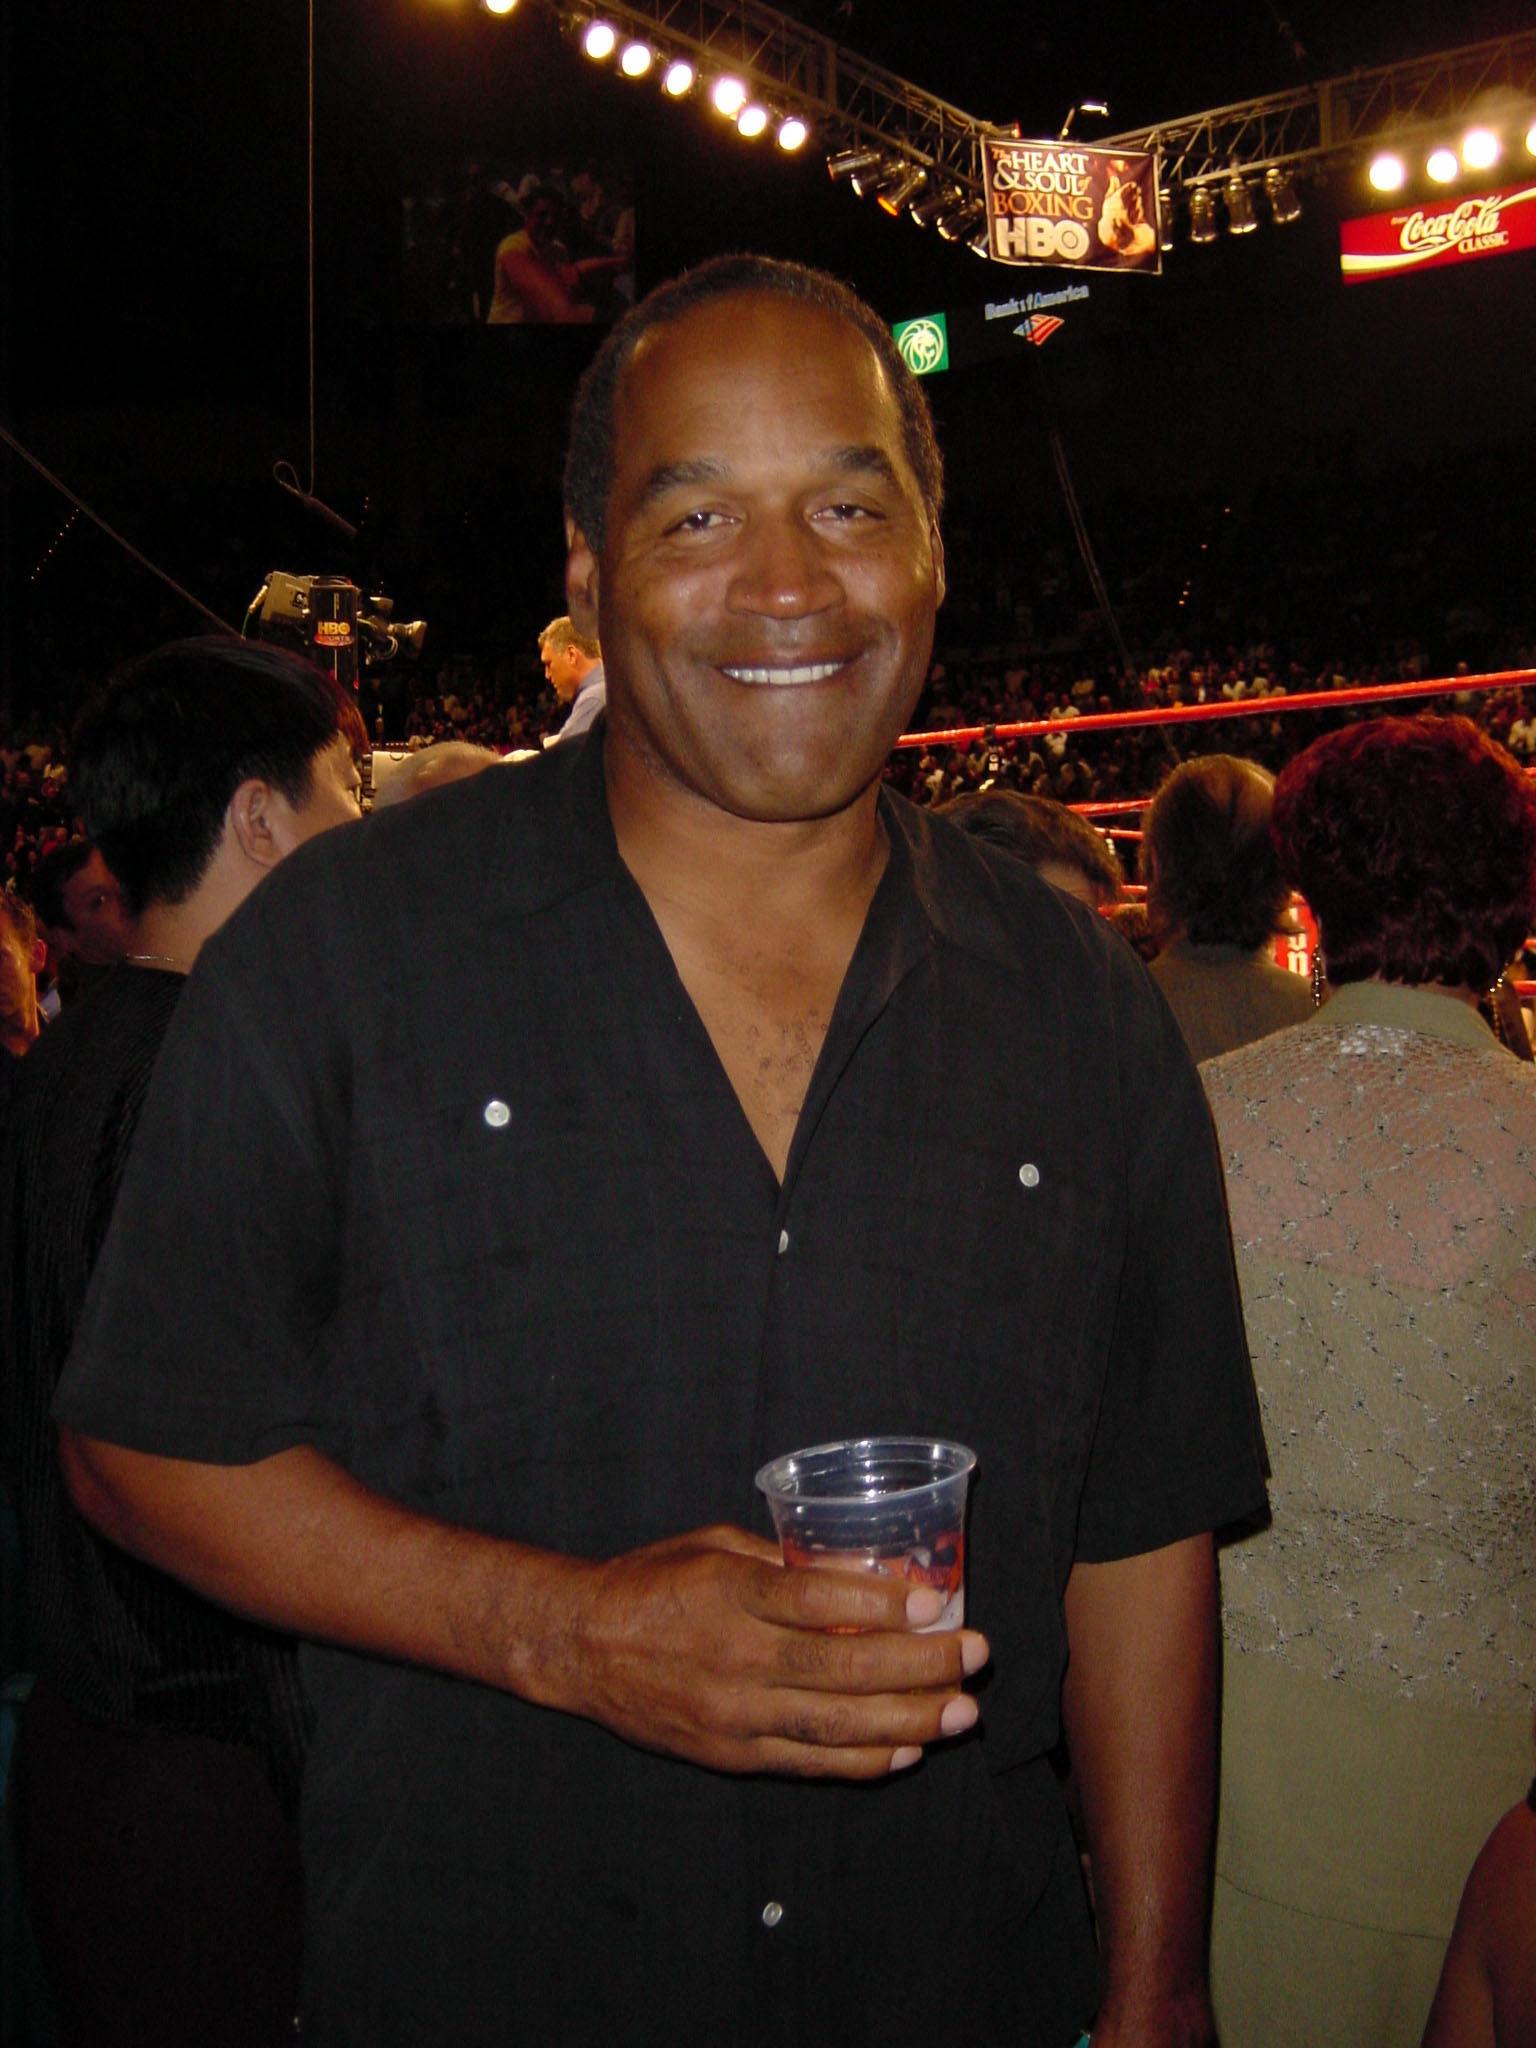 O.J. Simpson smiling while holding a drink